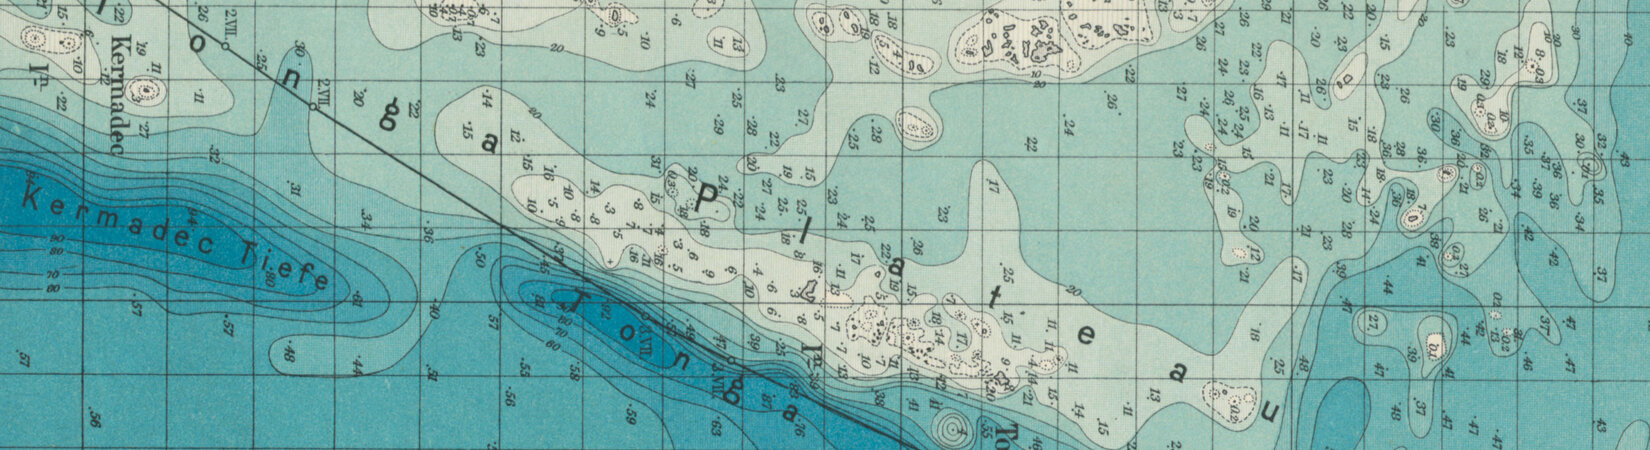 Sea Maps: For a History of Globalization from the Perspective of Water.